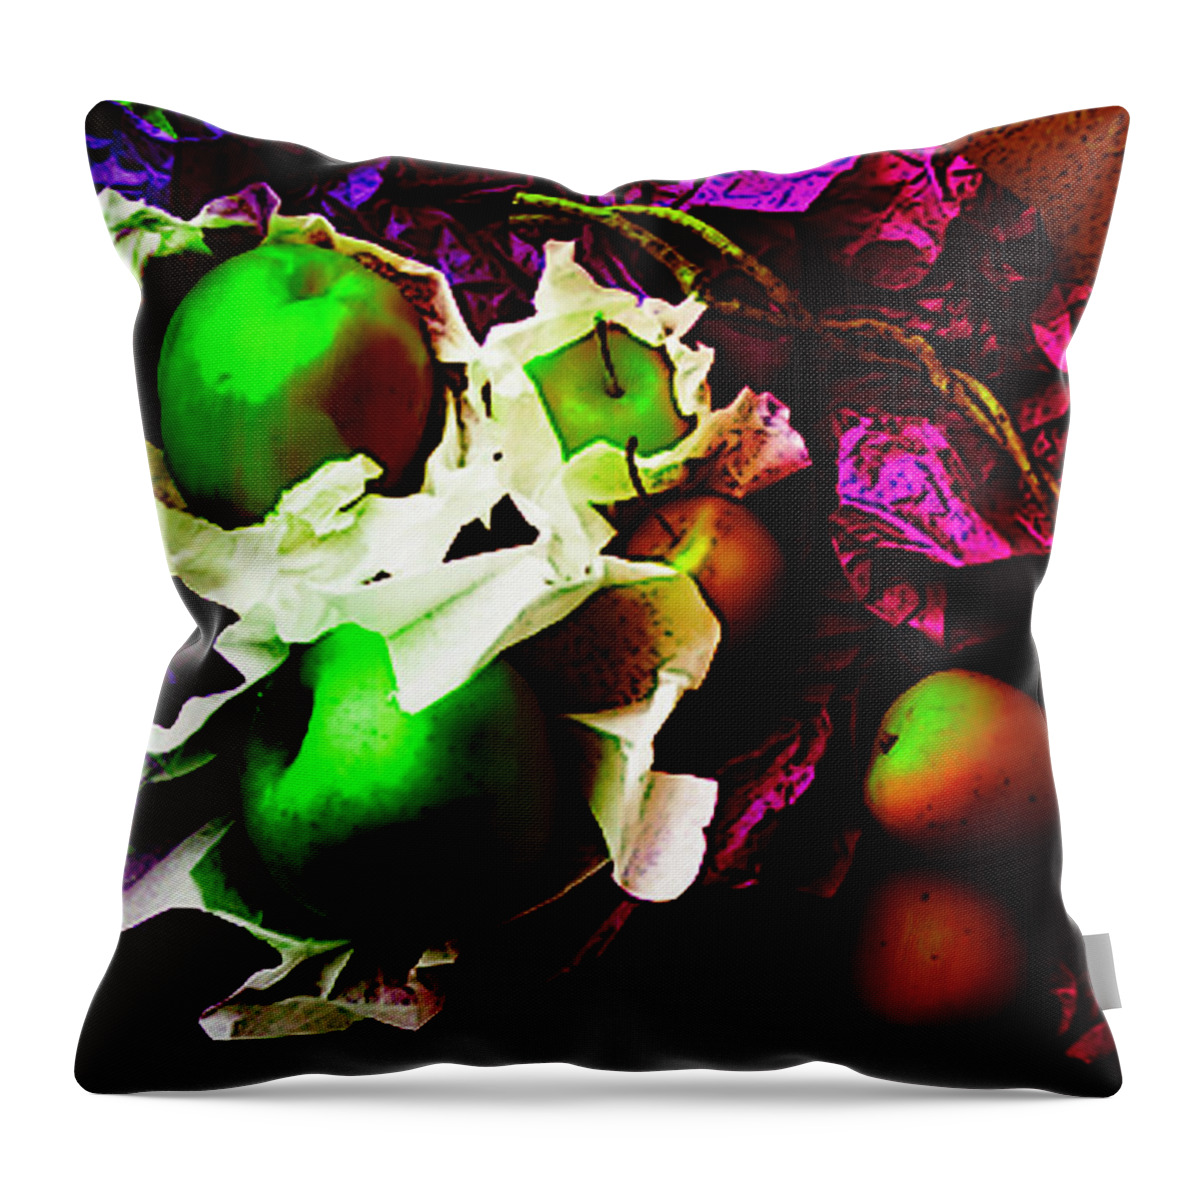 Apples Image Throw Pillow featuring the digital art The Forbidden Fruit II by Yael VanGruber